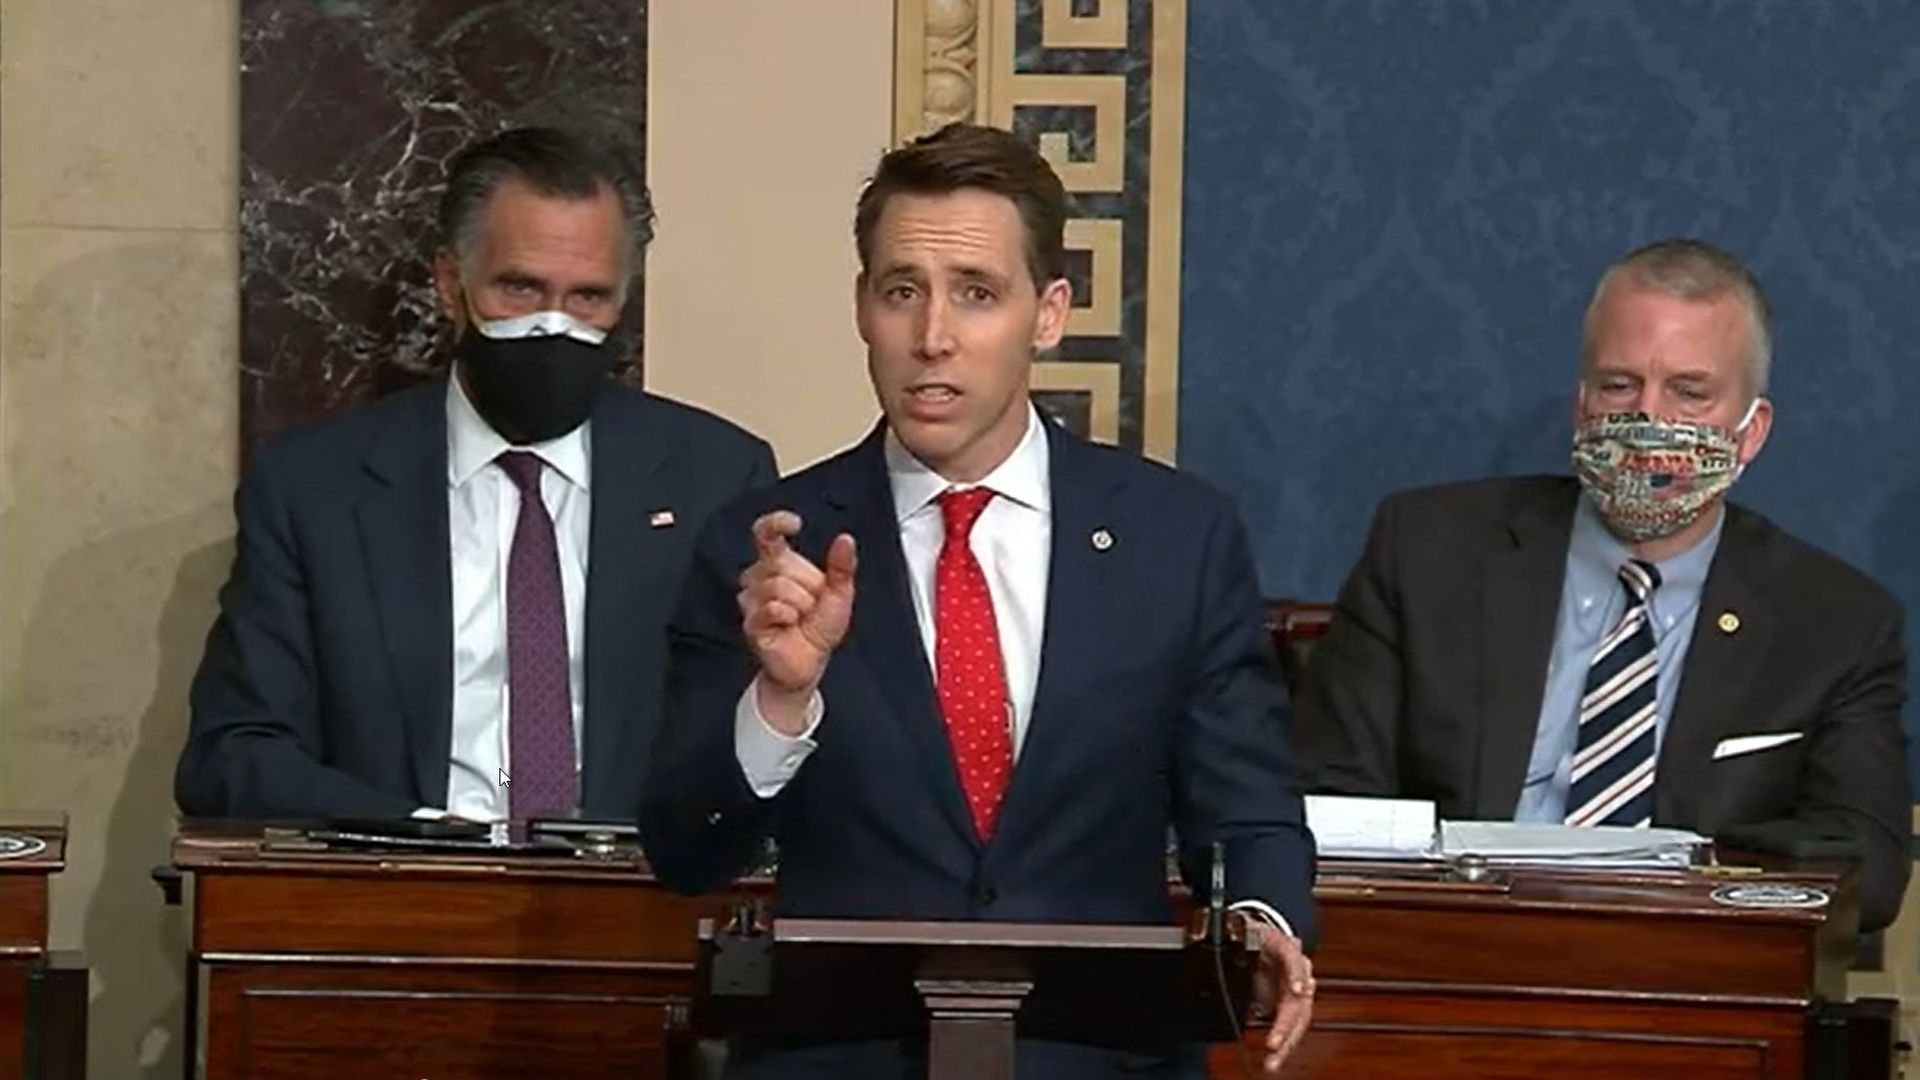 Sen. Josh Hawley is seen challenging the 2020 election results just before the Jan. 6 Capitol siege.